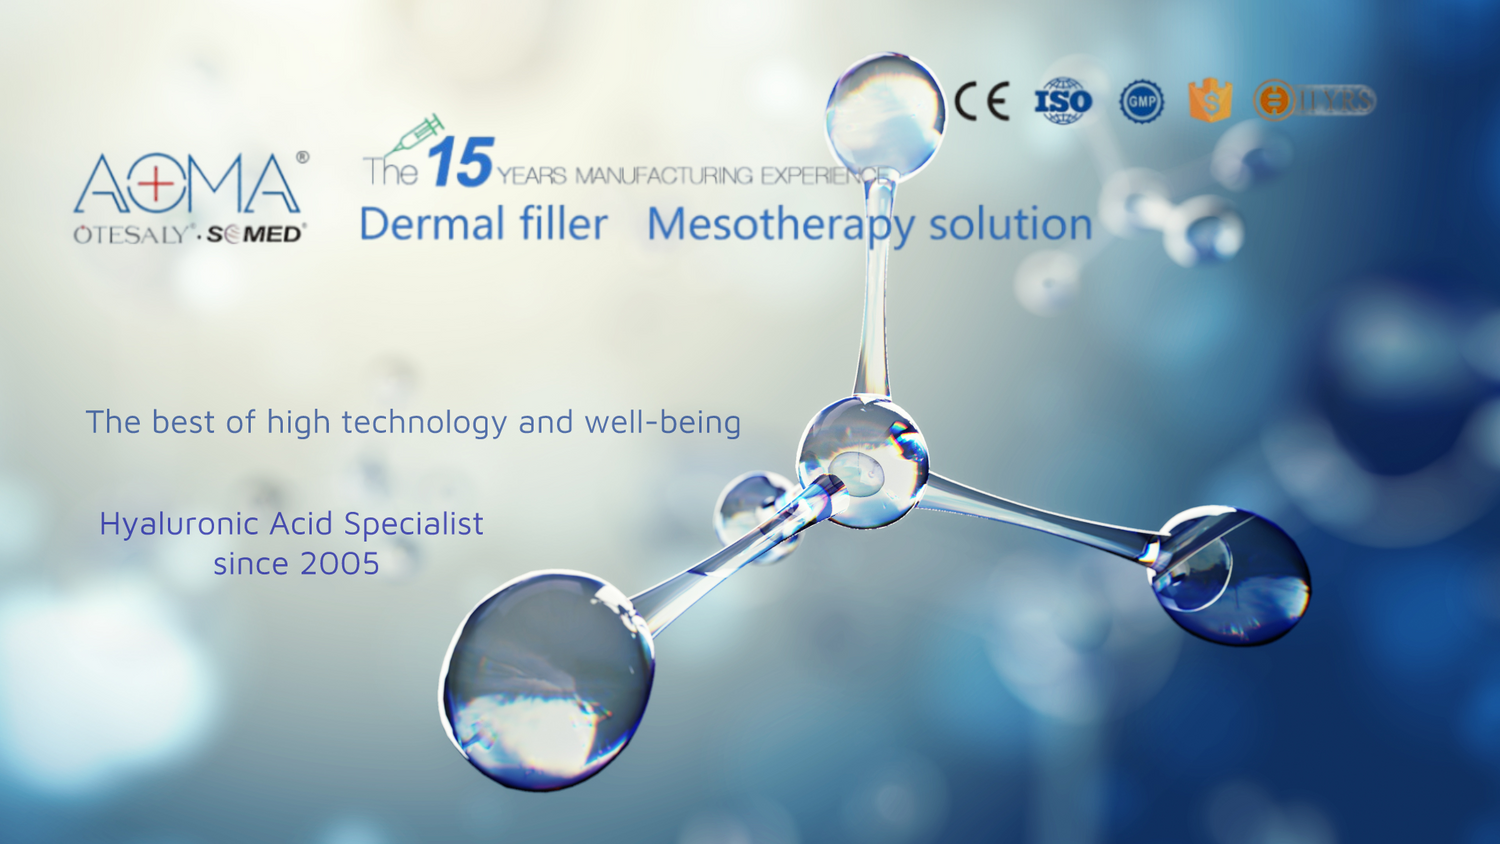 Why Choose OTESALY Dermal Filler & Mesotherapy Solution?